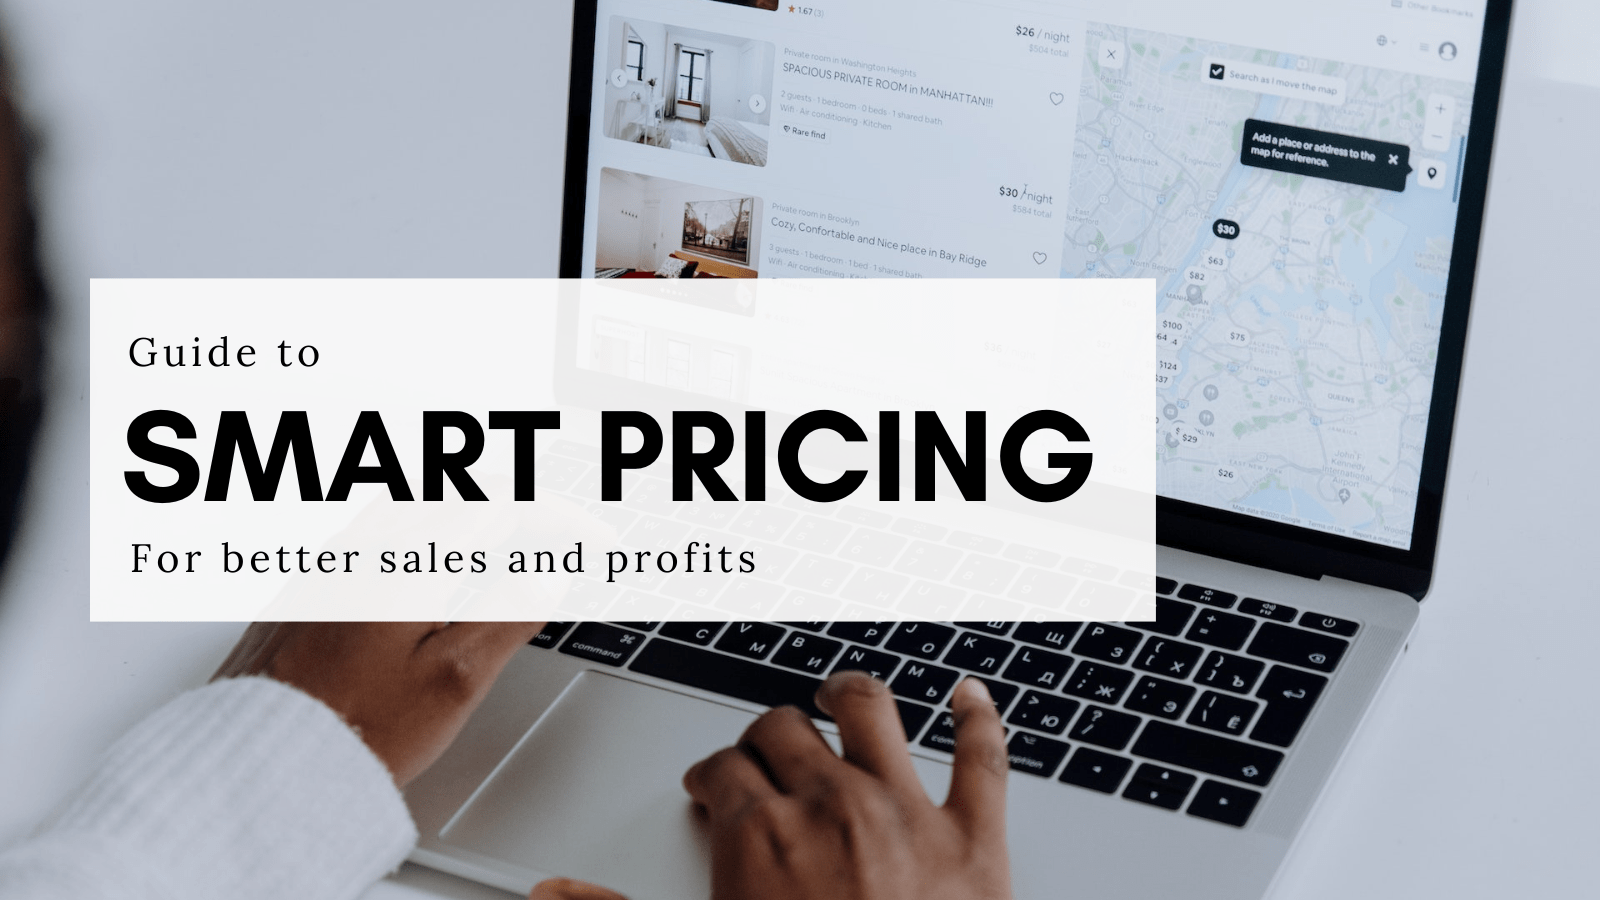 <strong>HOW TO PERFORM SMART PRICING?</strong>